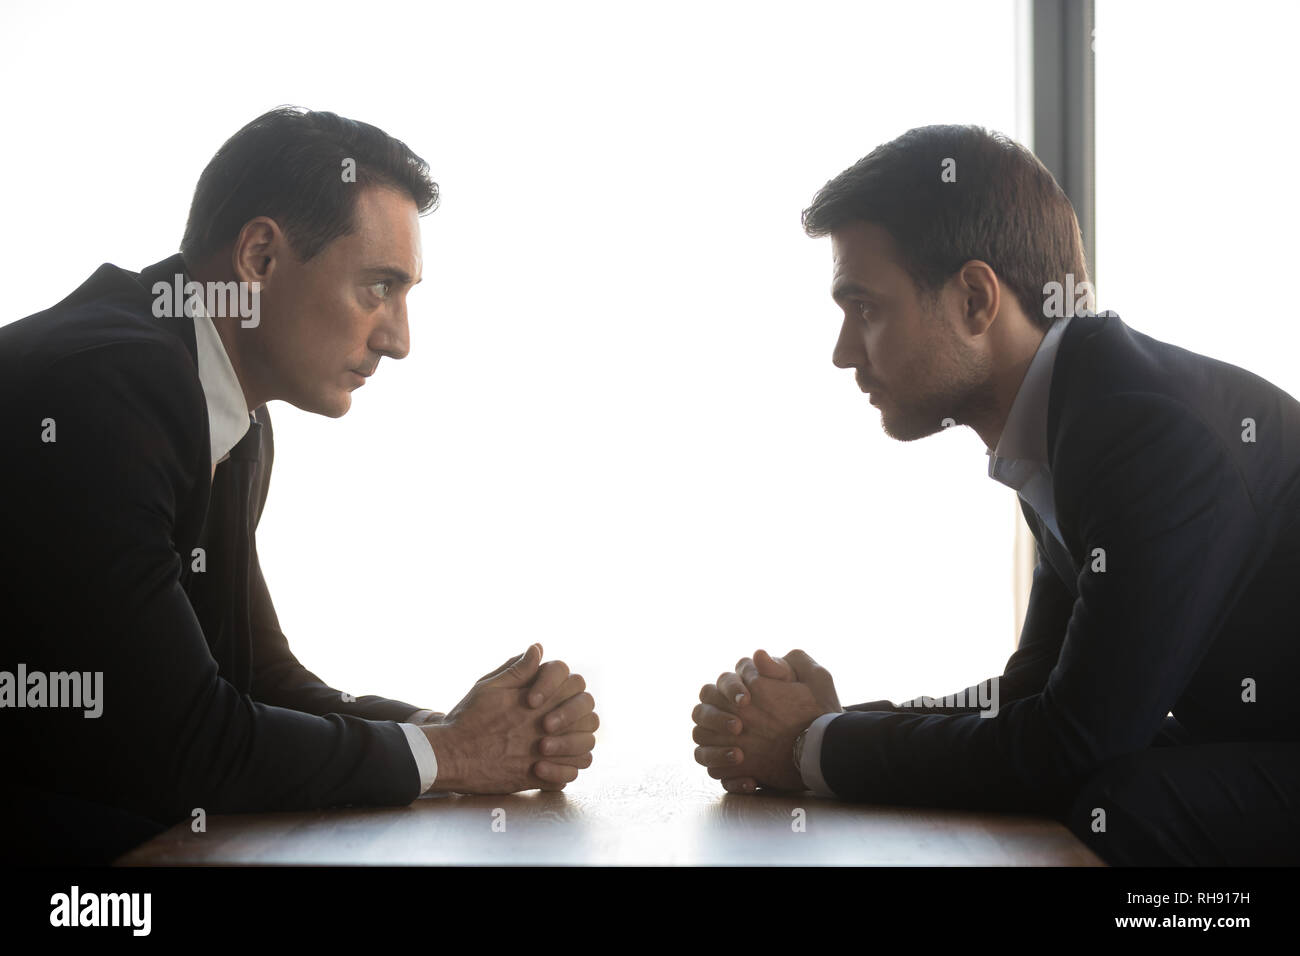 Two businessmen look at each other sitting opposite, rivalry concept Stock Photo